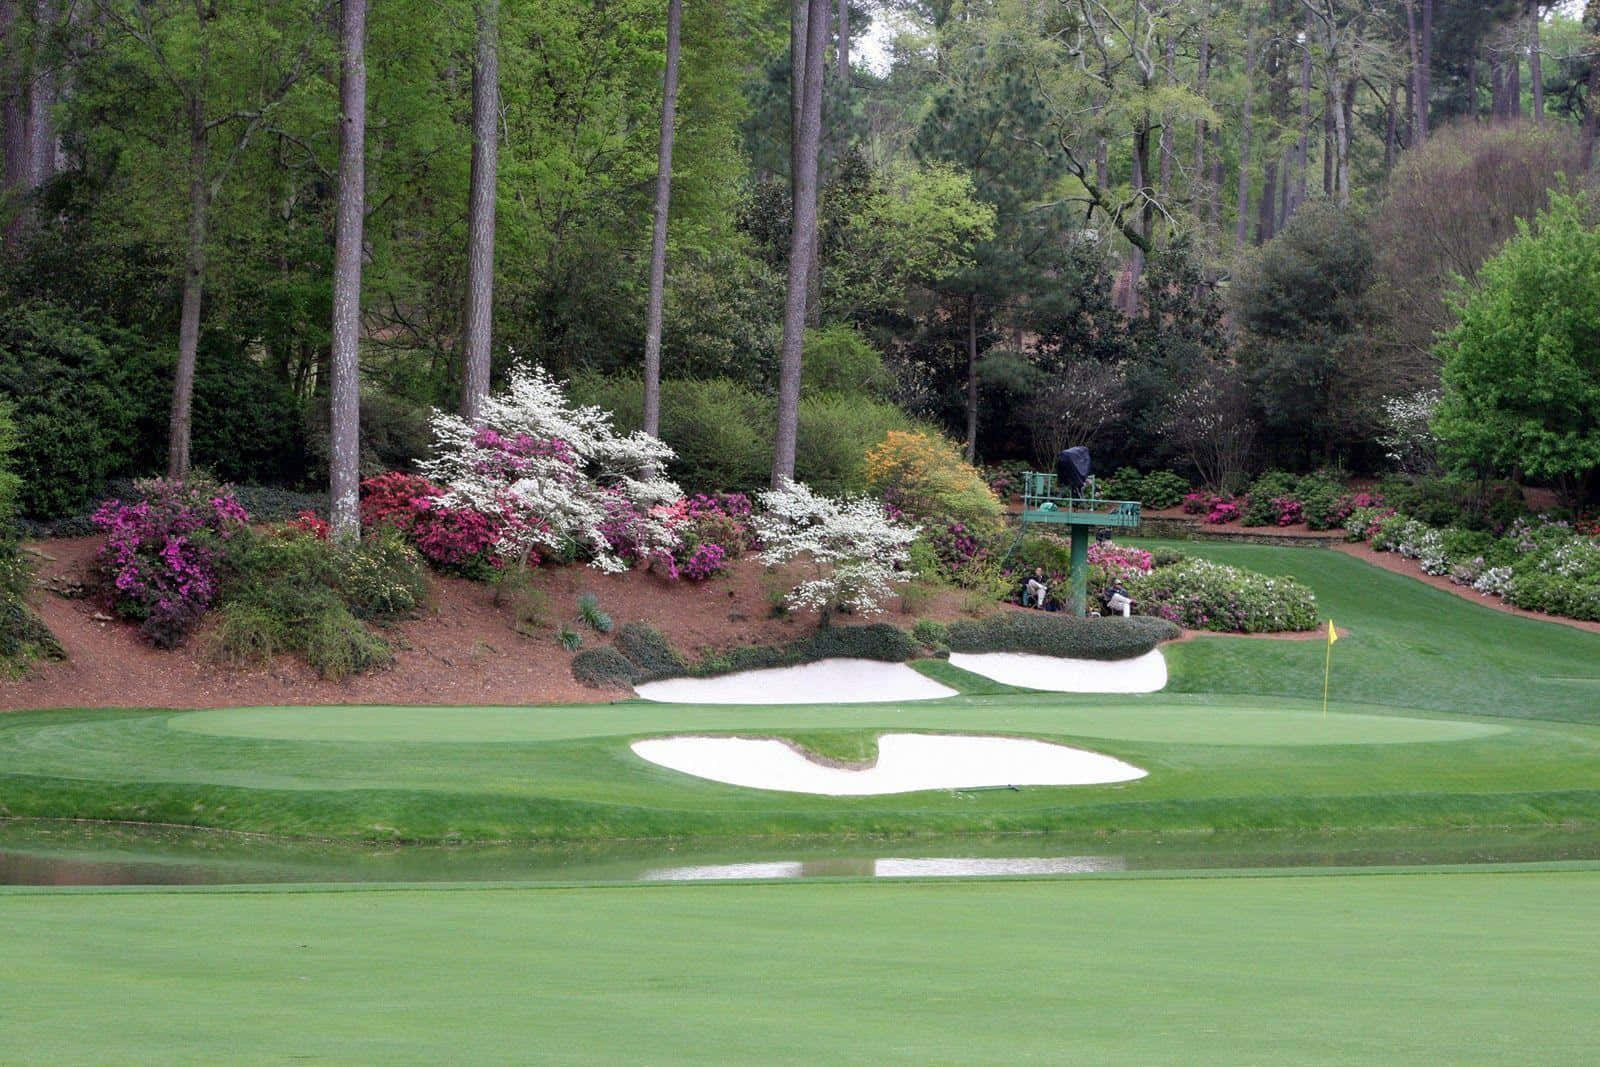 Golf lovers rejoice at the beautiful and iconic Augusta National Wallpaper